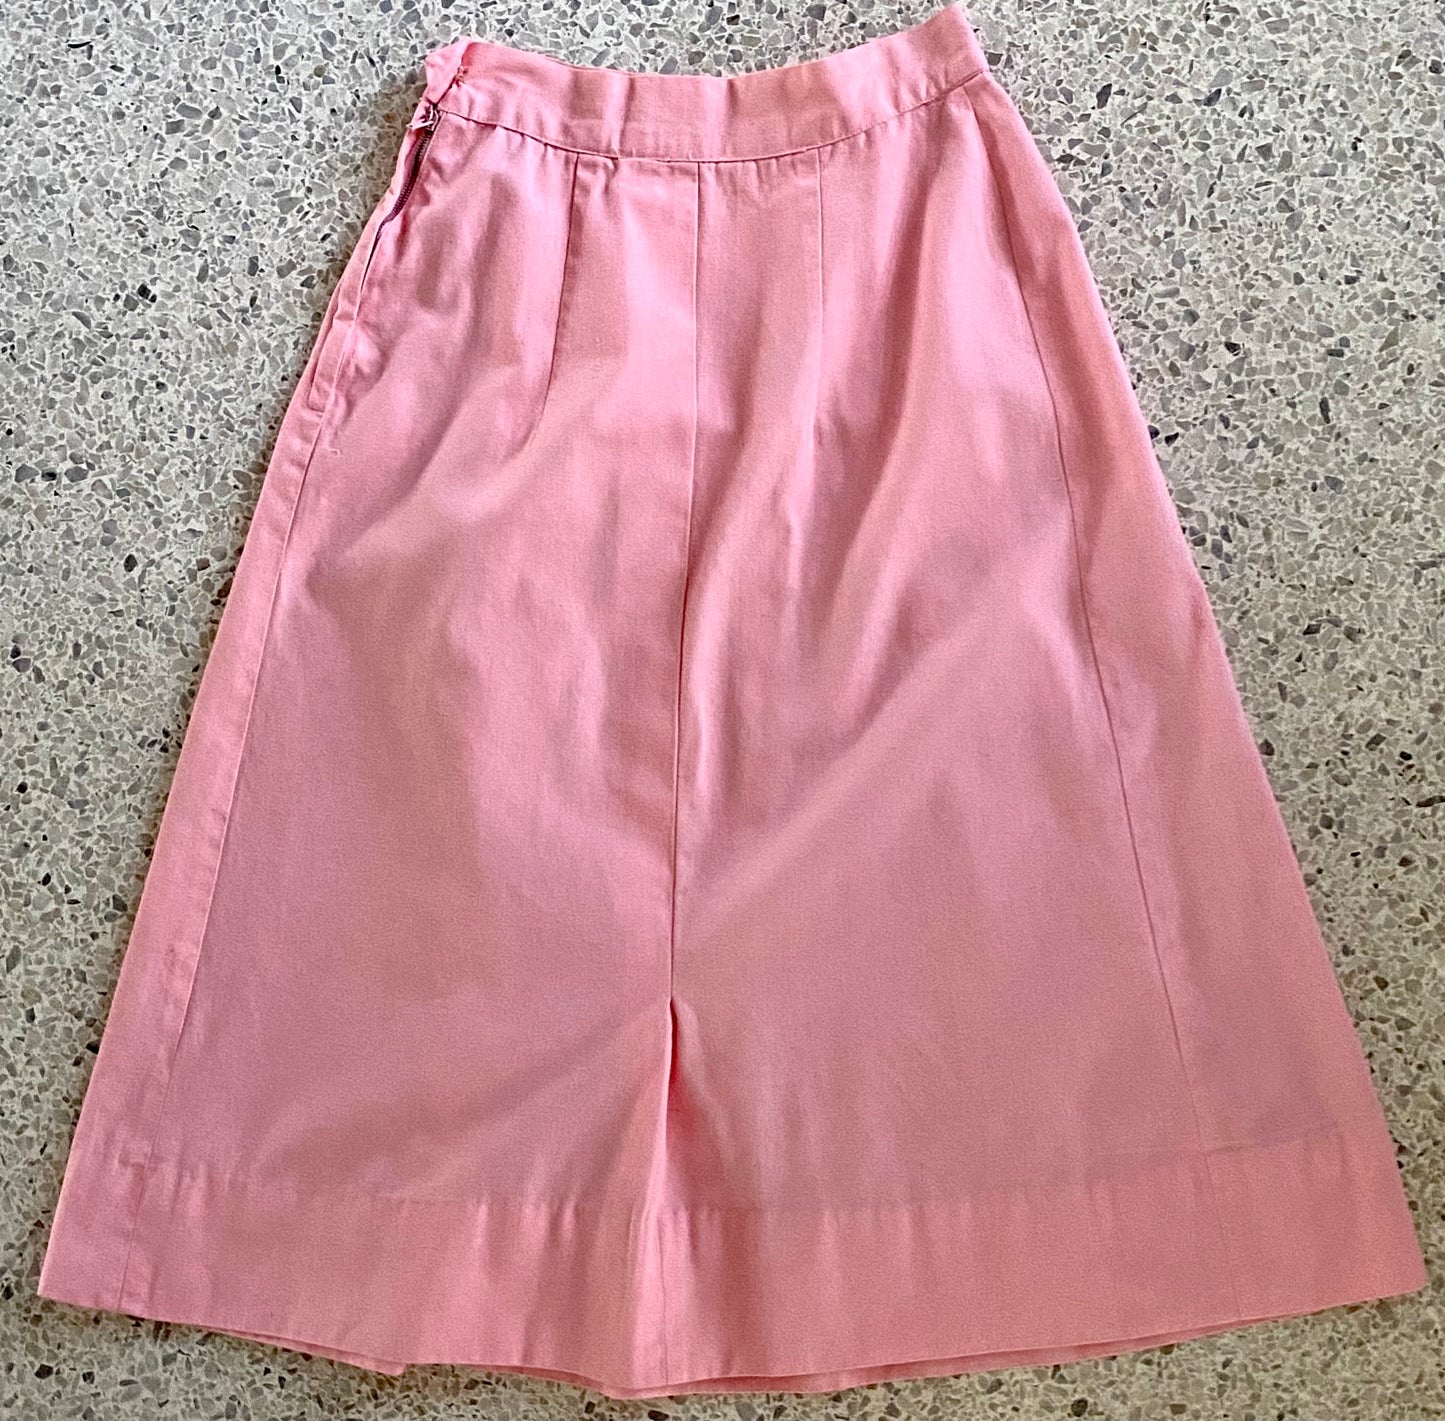 Late 50s/ Early 60s Inverted Box Pleat Skirt